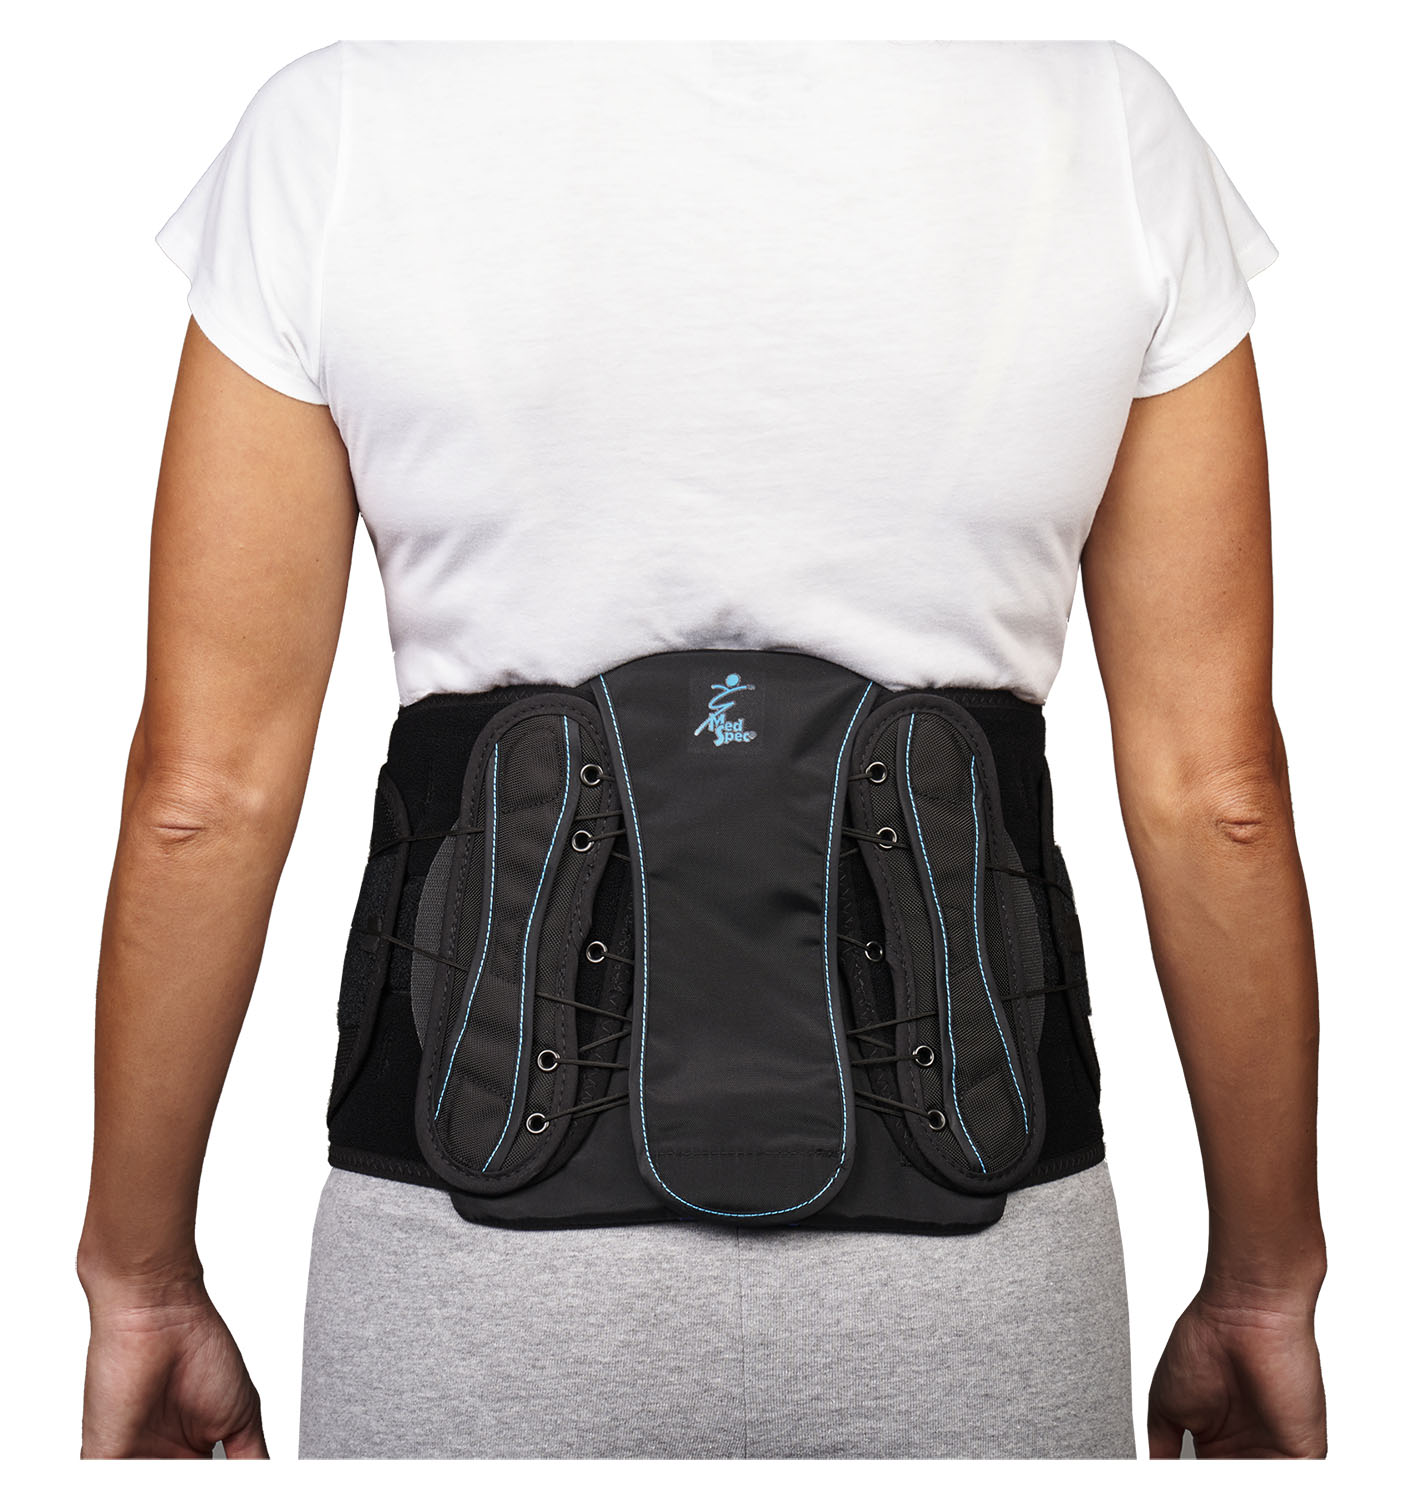 Back Supports - Classic Lumbar Supports - Page 1 - MedStorz